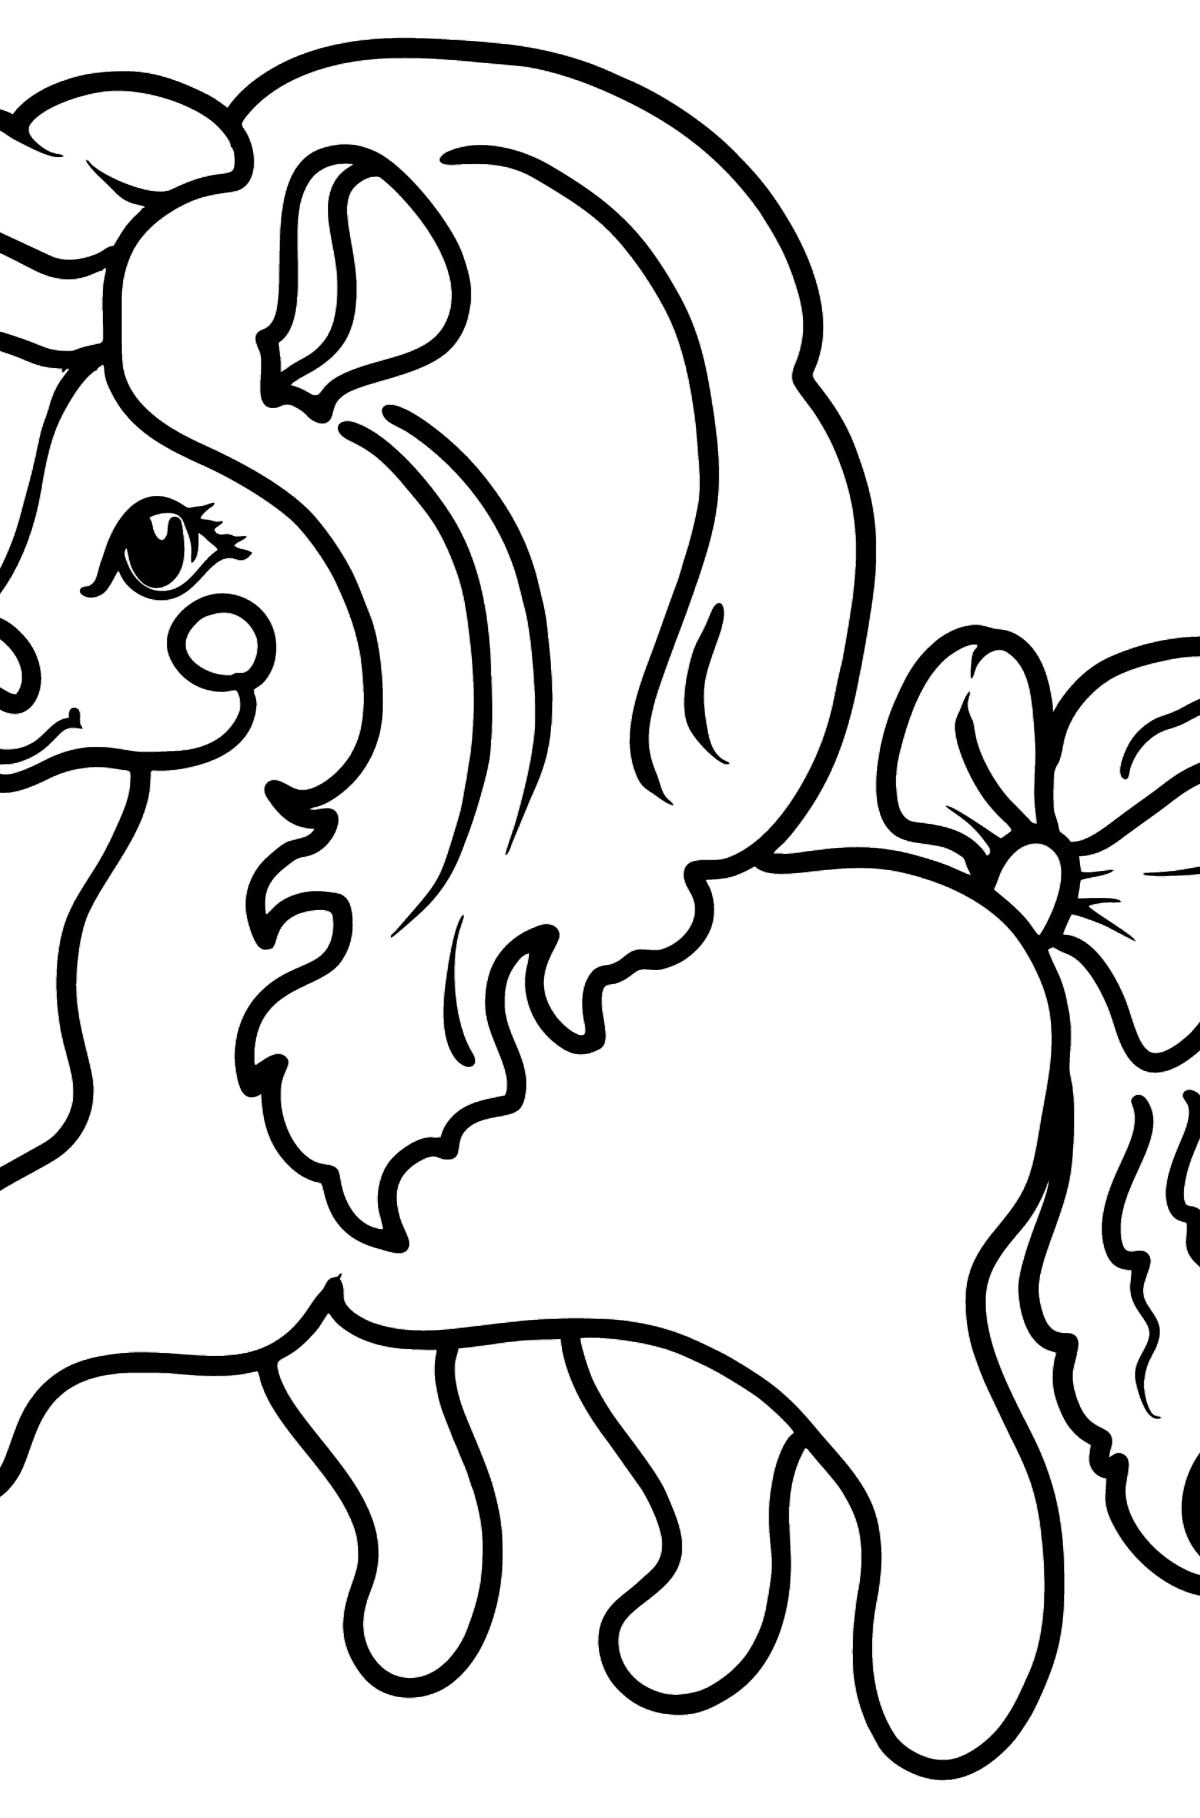 Tinesha Pony coloring page - Coloring Pages for Kids